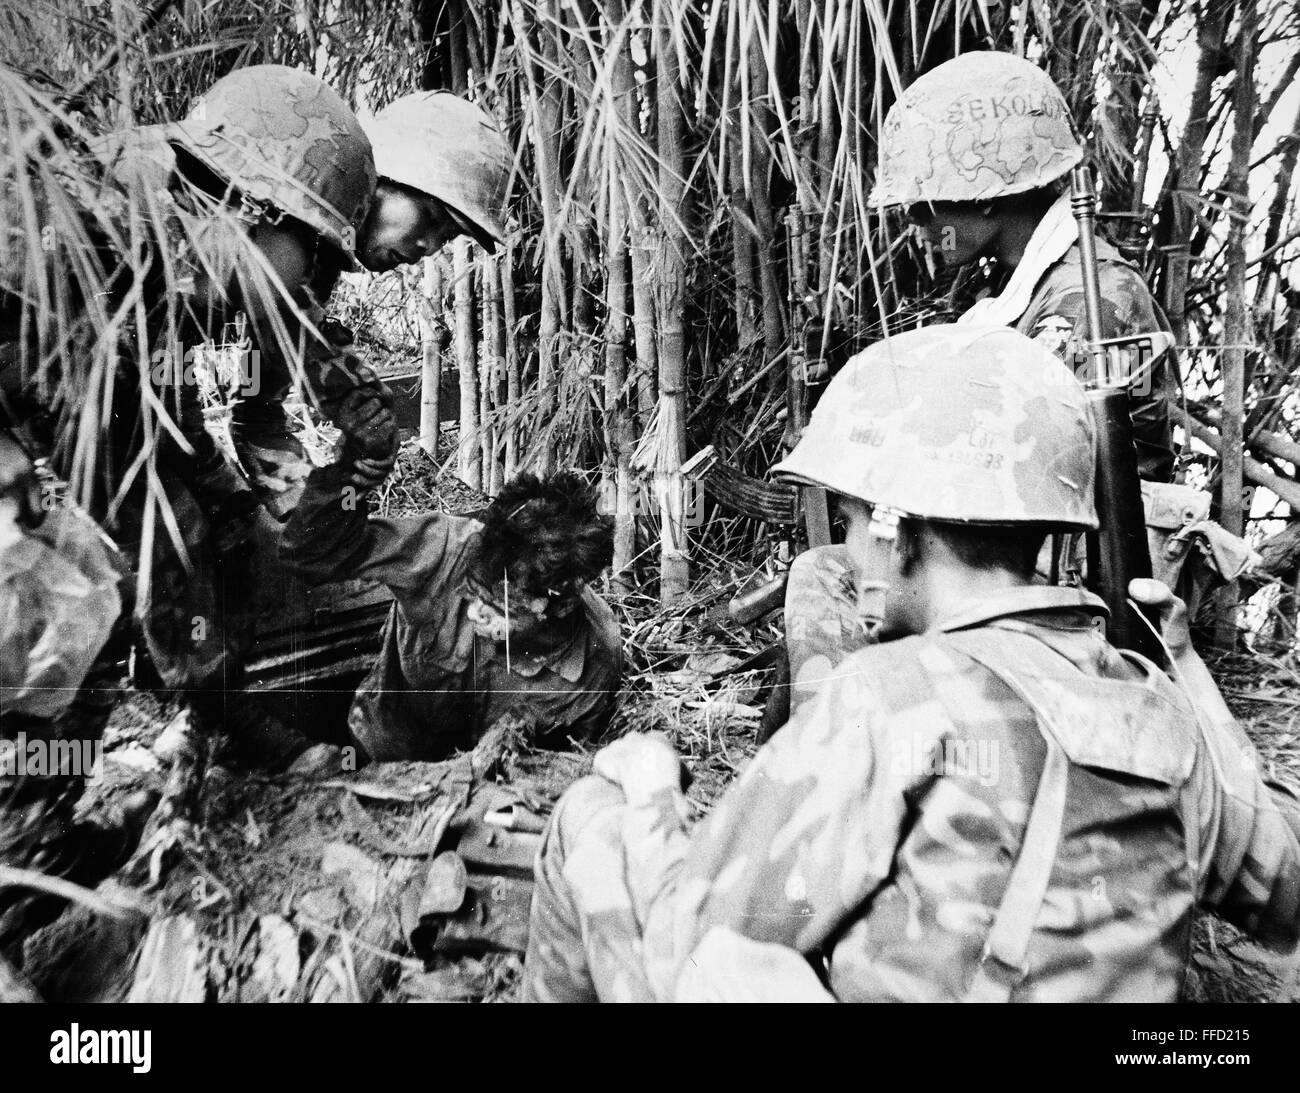 VIETNAM WAR: VIET CONG. /nMembers of a South Vietnamese Special Forces unit remove a Viet Cong from his hiding place during fighting near Saigon, 6 June 1968. Stock Photo